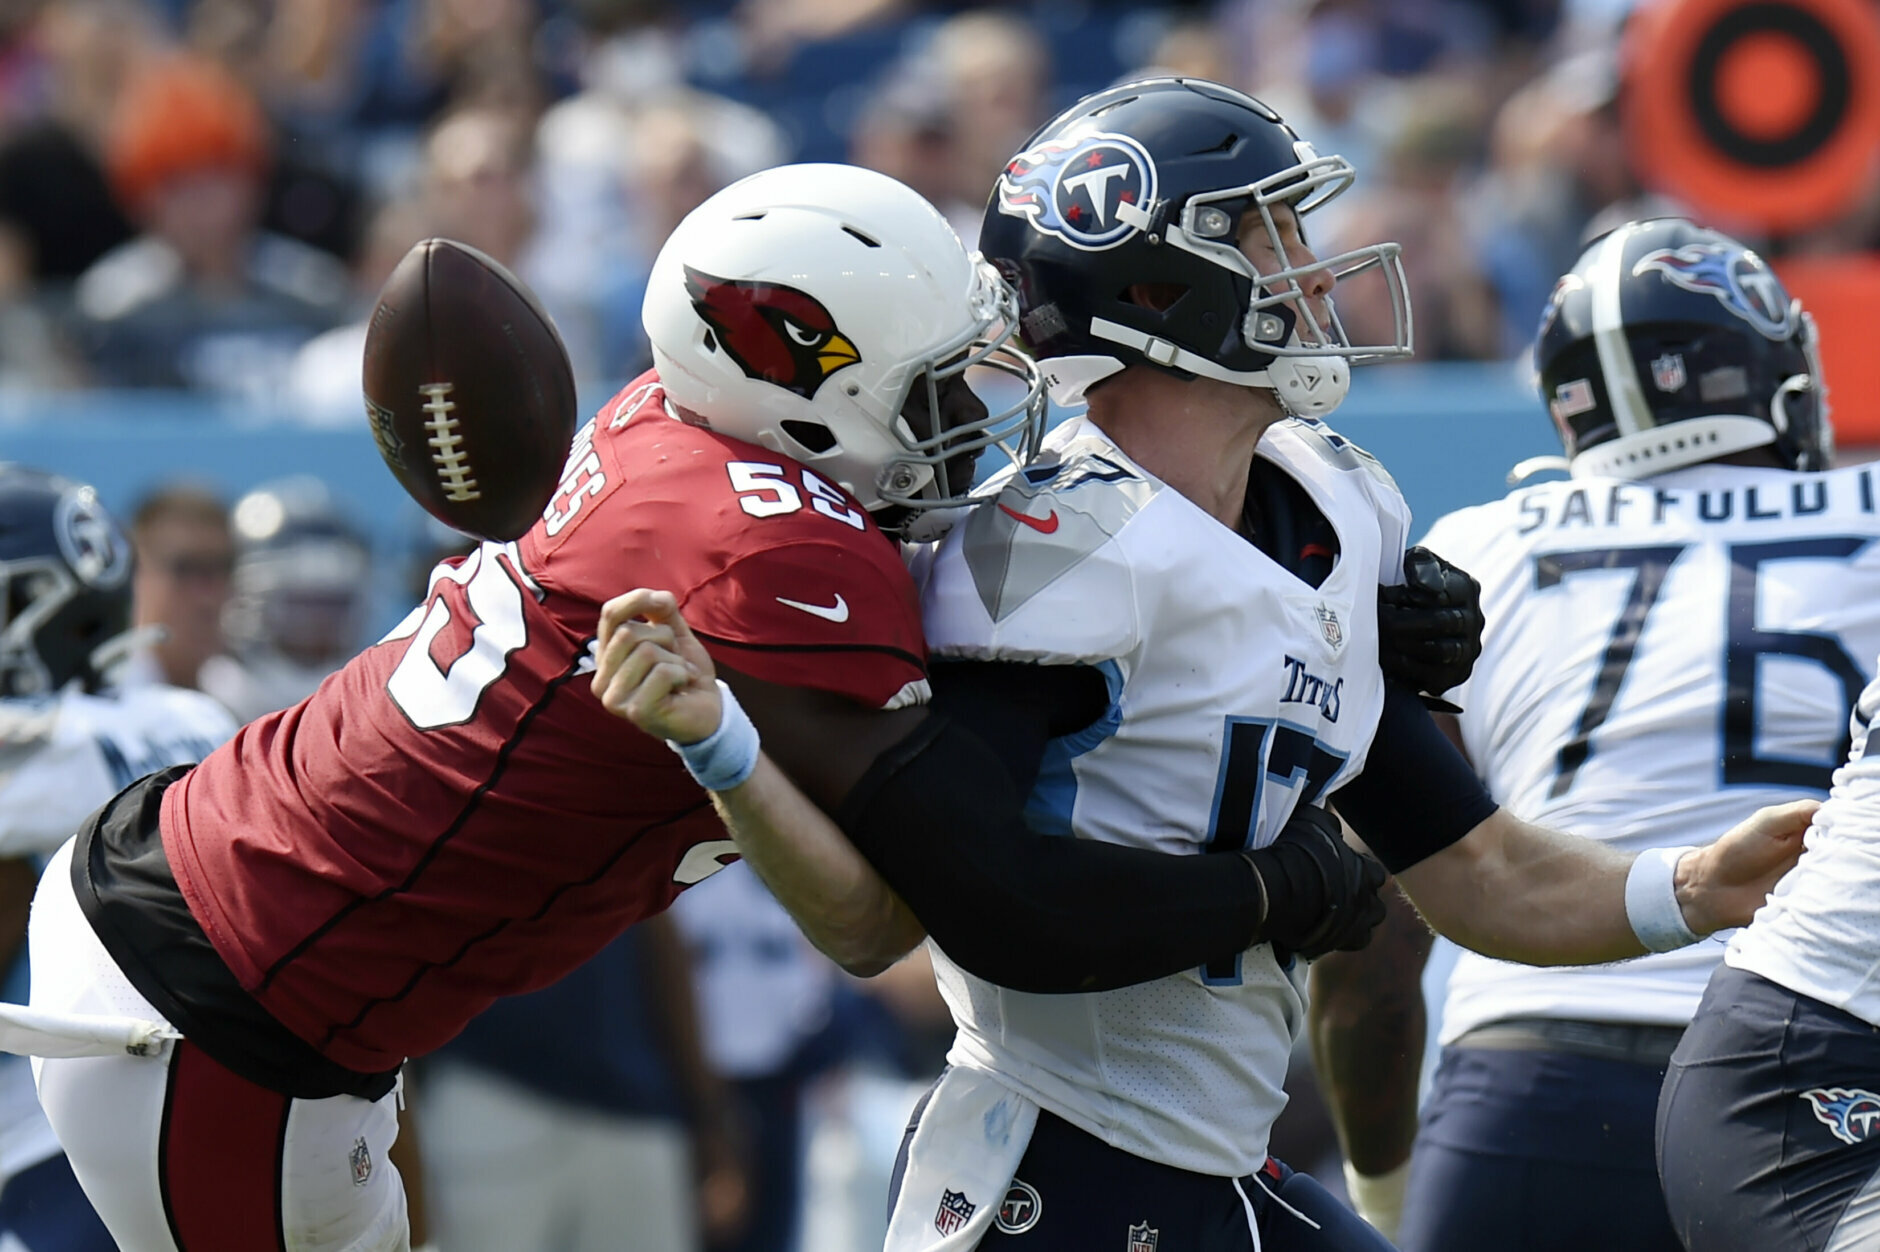 <p><b><i>Cardinals 38<br />
Titans 14</i></b></p>
<p>I sure didn&#8217;t see this coming &#8212; Arizona dominated Tennessee in their own building, shutting down Derrick Henry, getting five sacks from Chandler Jones and scoring five Kyler Murray touchdowns. The Titans defense might hold them back from reaching <a href="https://wtop.com/nfl/2021/09/2021-afc-south-preview/" target="_blank" rel="noopener">my lofty expectations</a>.</p>
